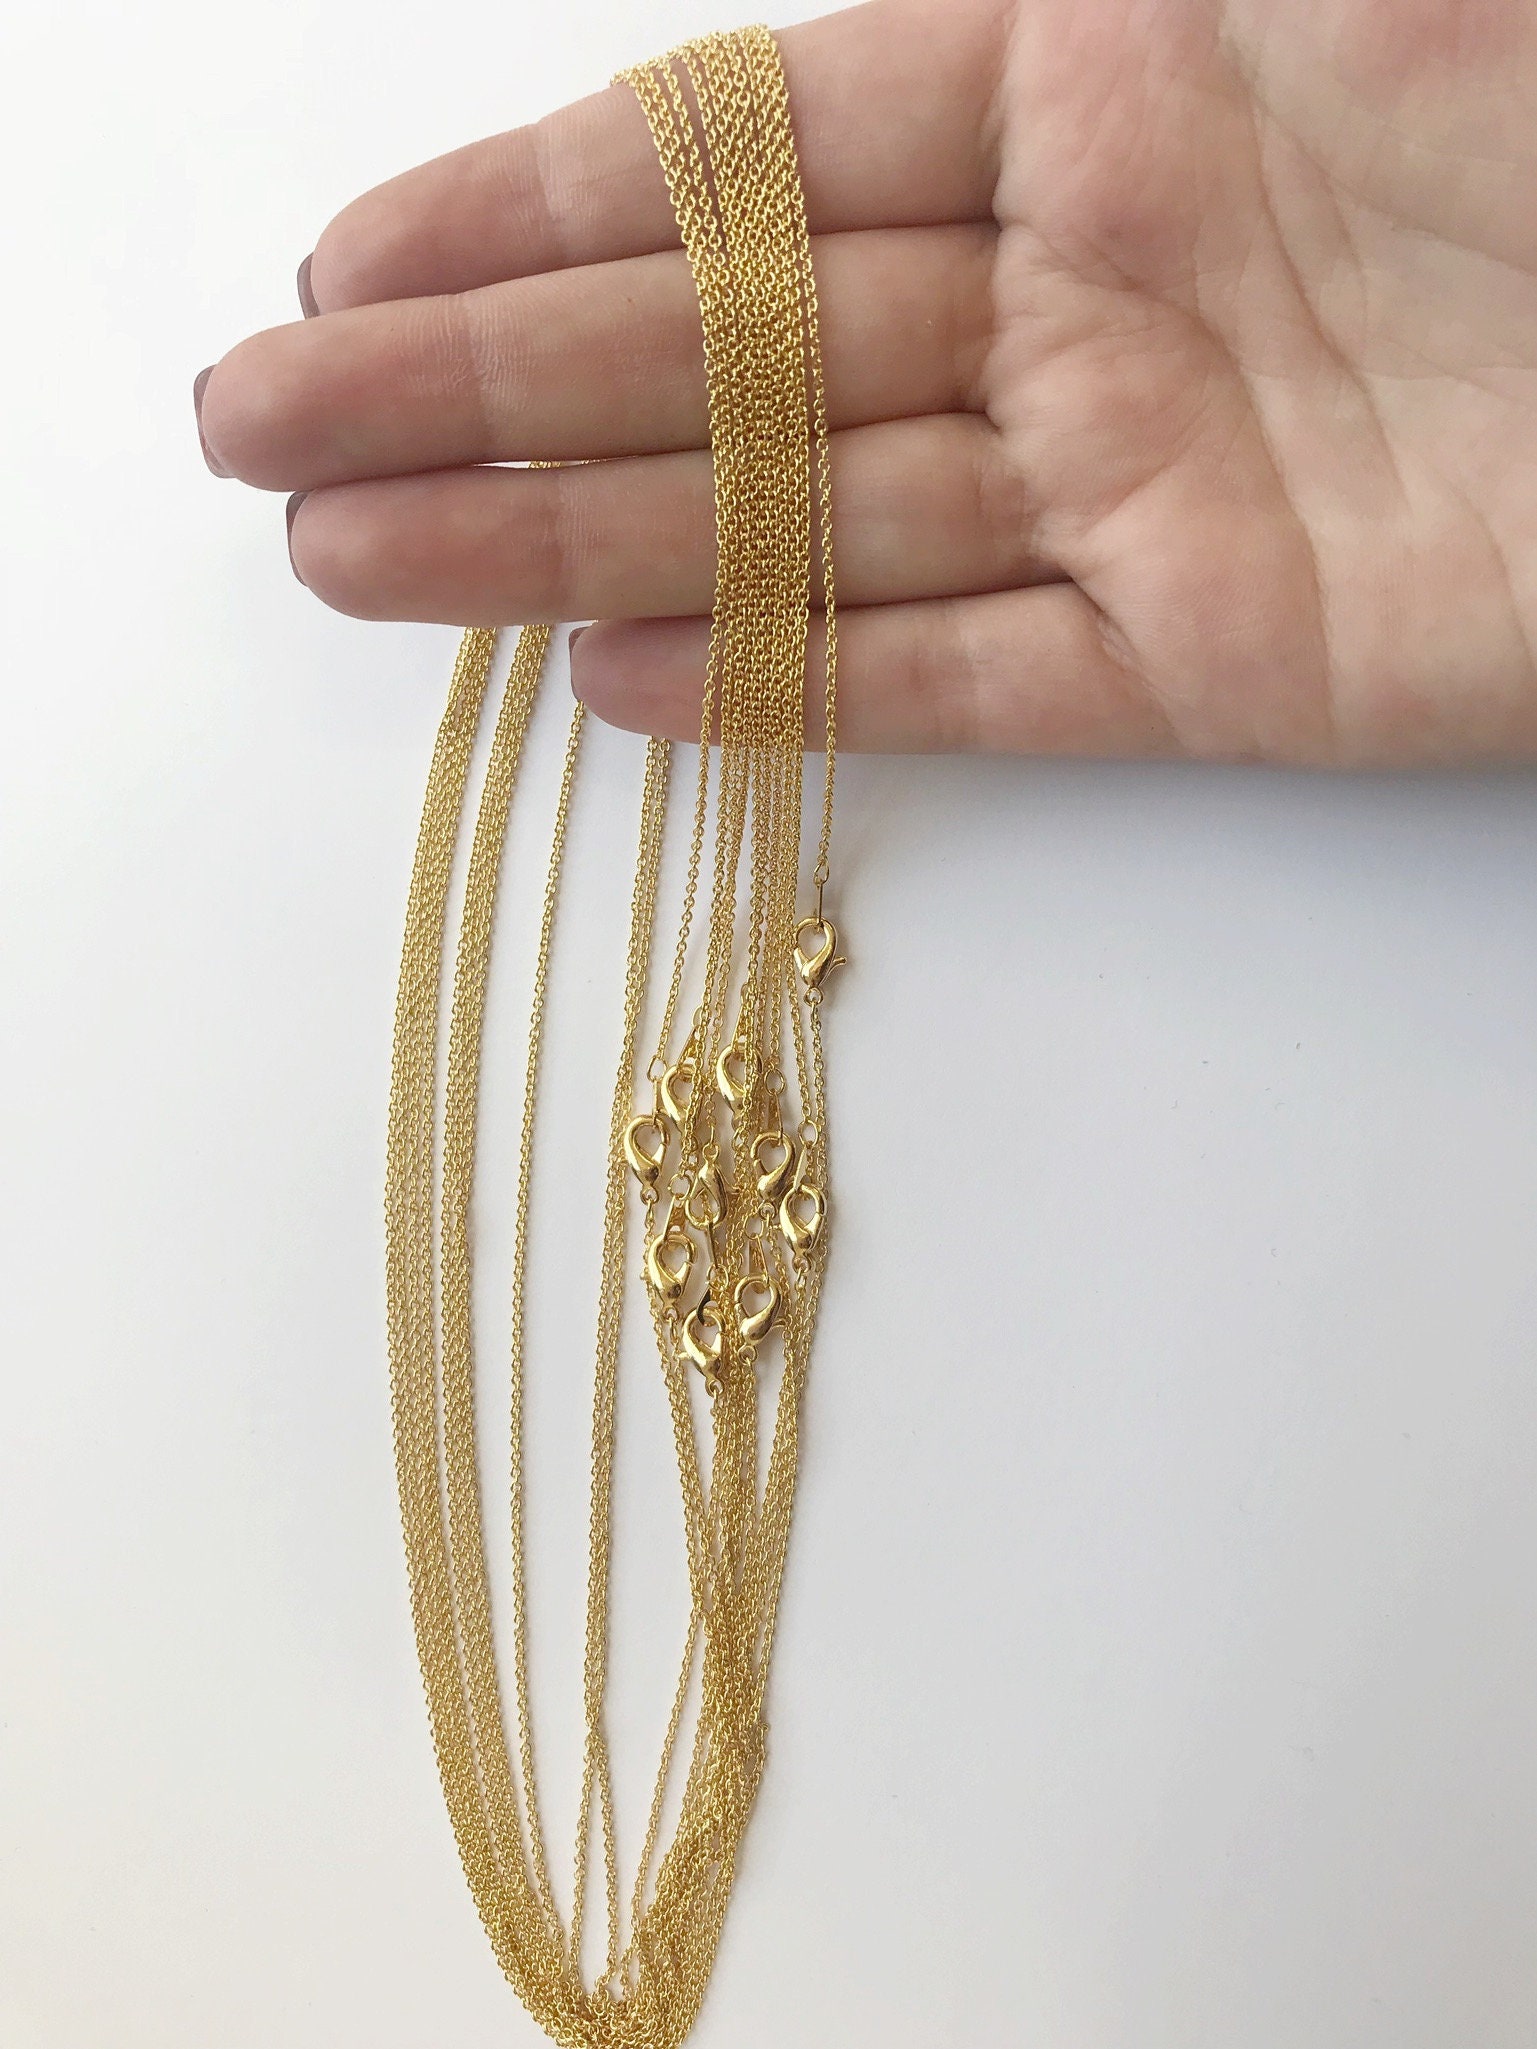 Gold 18 Finished Necklace Chains for Jewelry Making, Gold Plated Chains  Jewelry Findings, Wholesale Chains, Bulk Chains, USA Supplier -  Norway